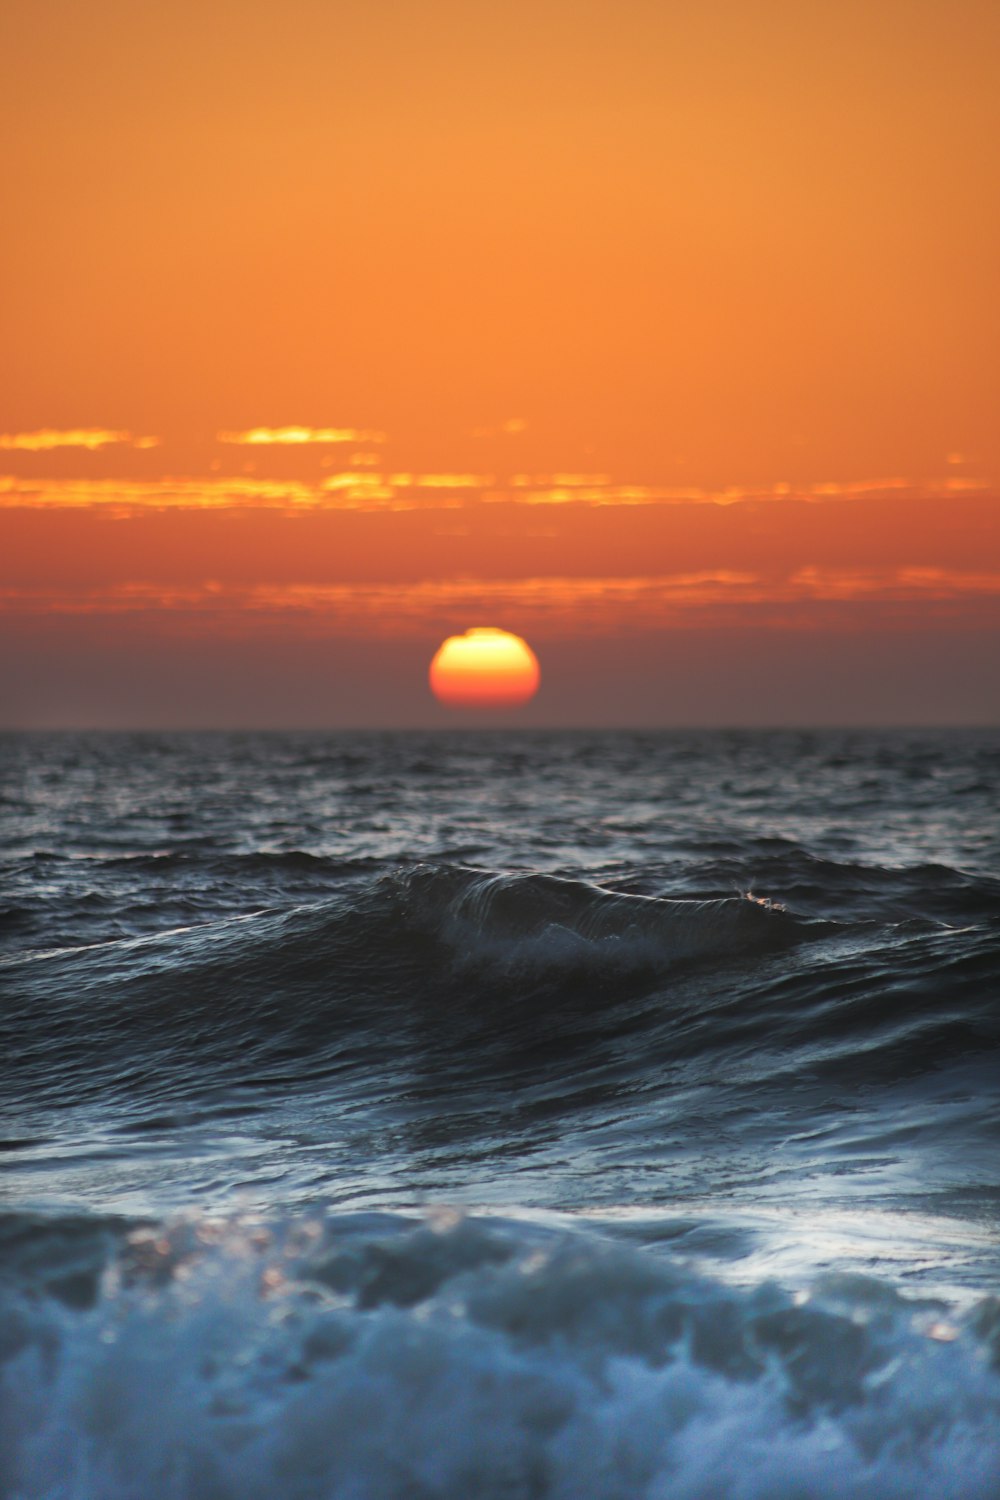 the sun is setting over the ocean waves